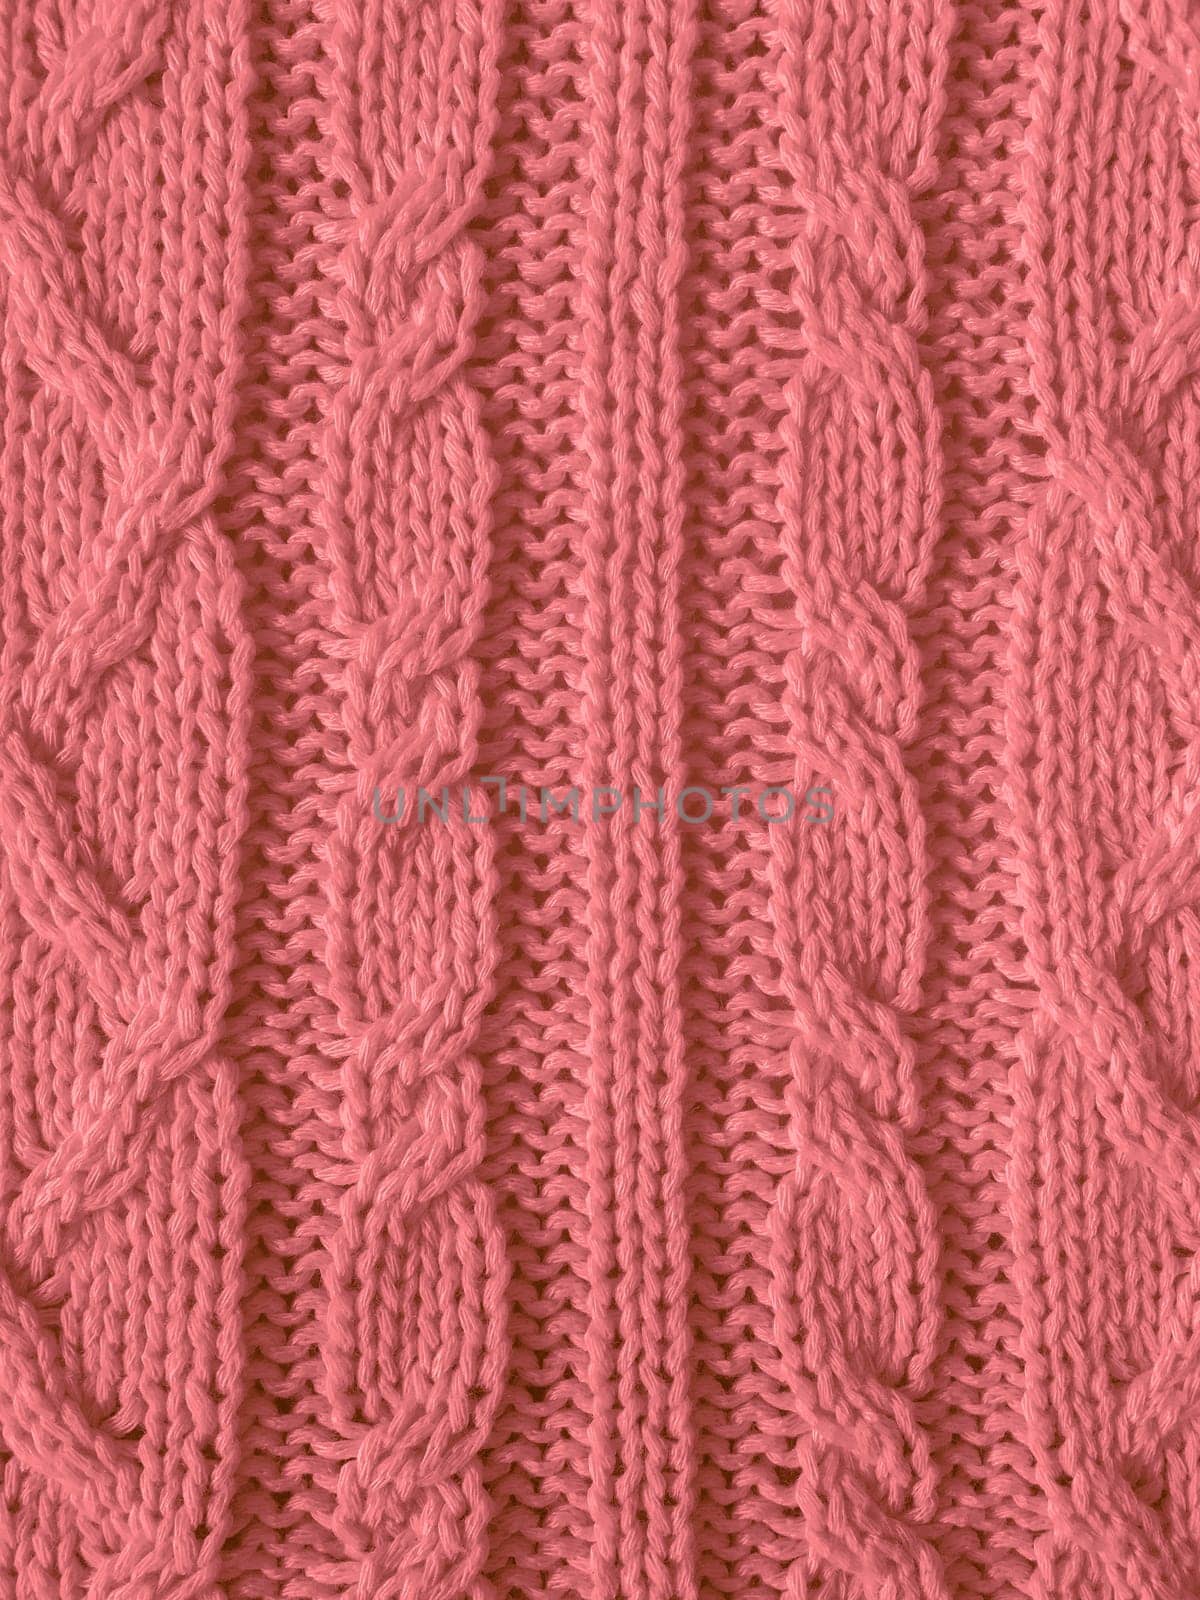 Xmas Knitted Background. Vintage Woolen Pullover. Closeup Knitwear Thread Cashmere. Christmas Knitted Texture. Abstract Linen Print. Soft Nordic Embroidery. Red Christmas Knitting Pattern.